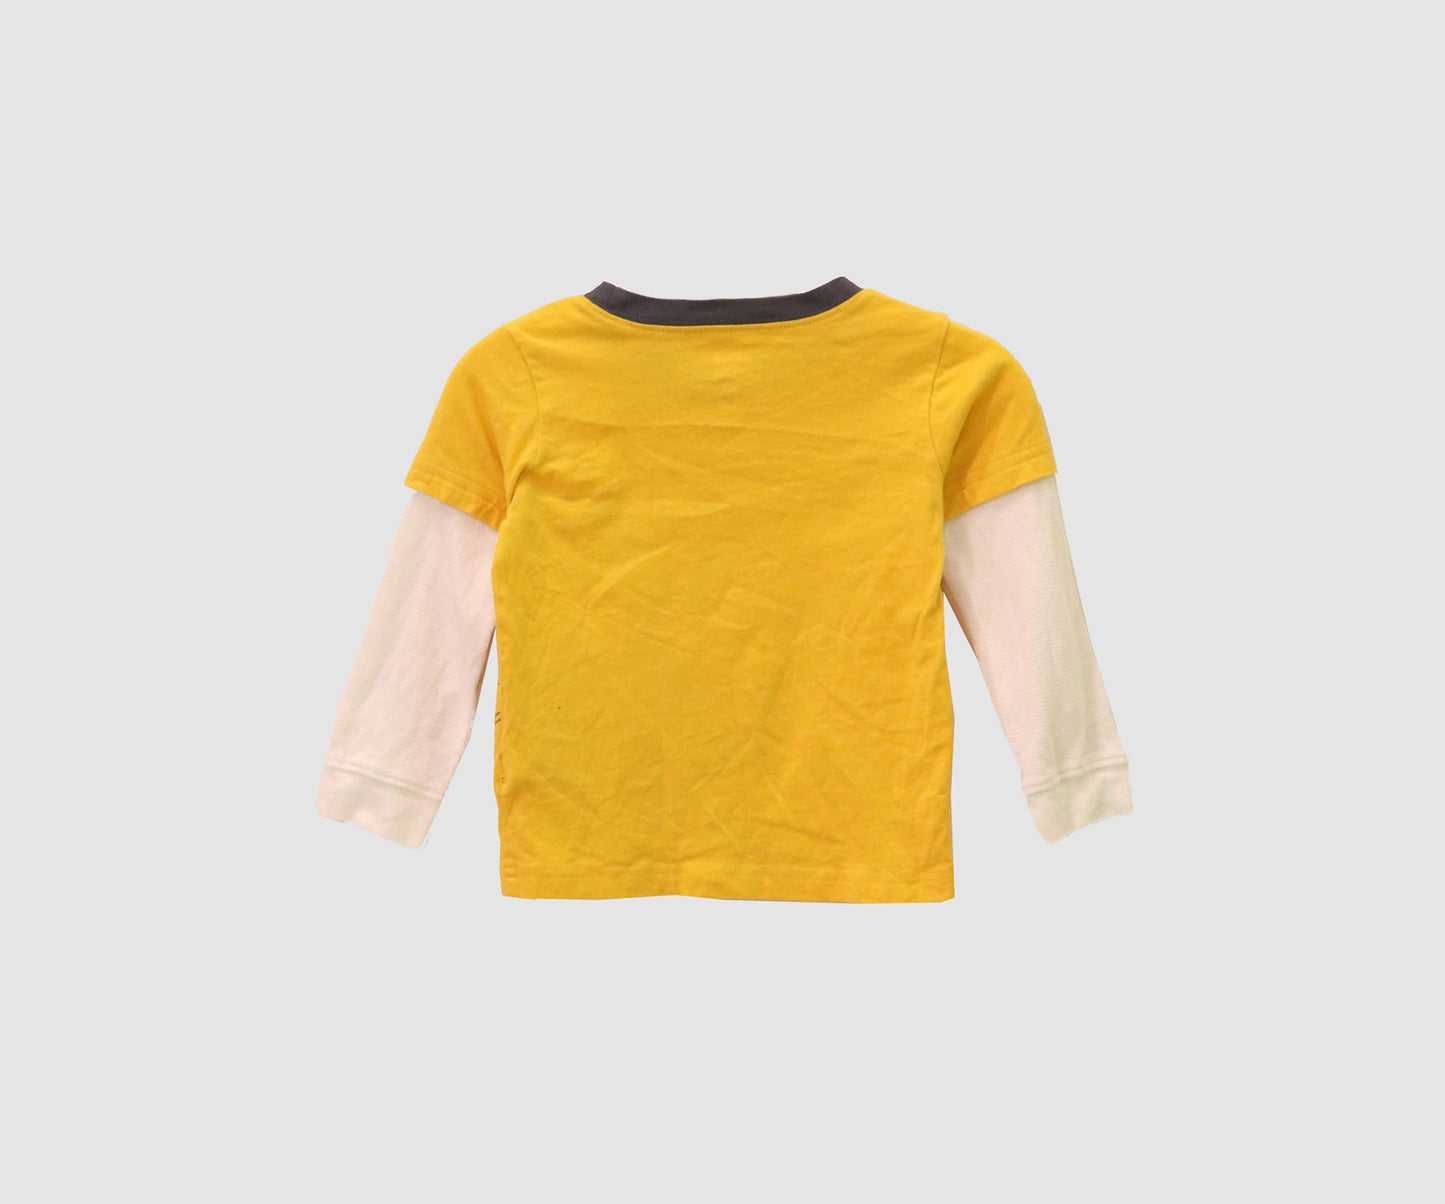 Carter's Baby Boy 24 Months / Yellow / White Long Sleeve Top